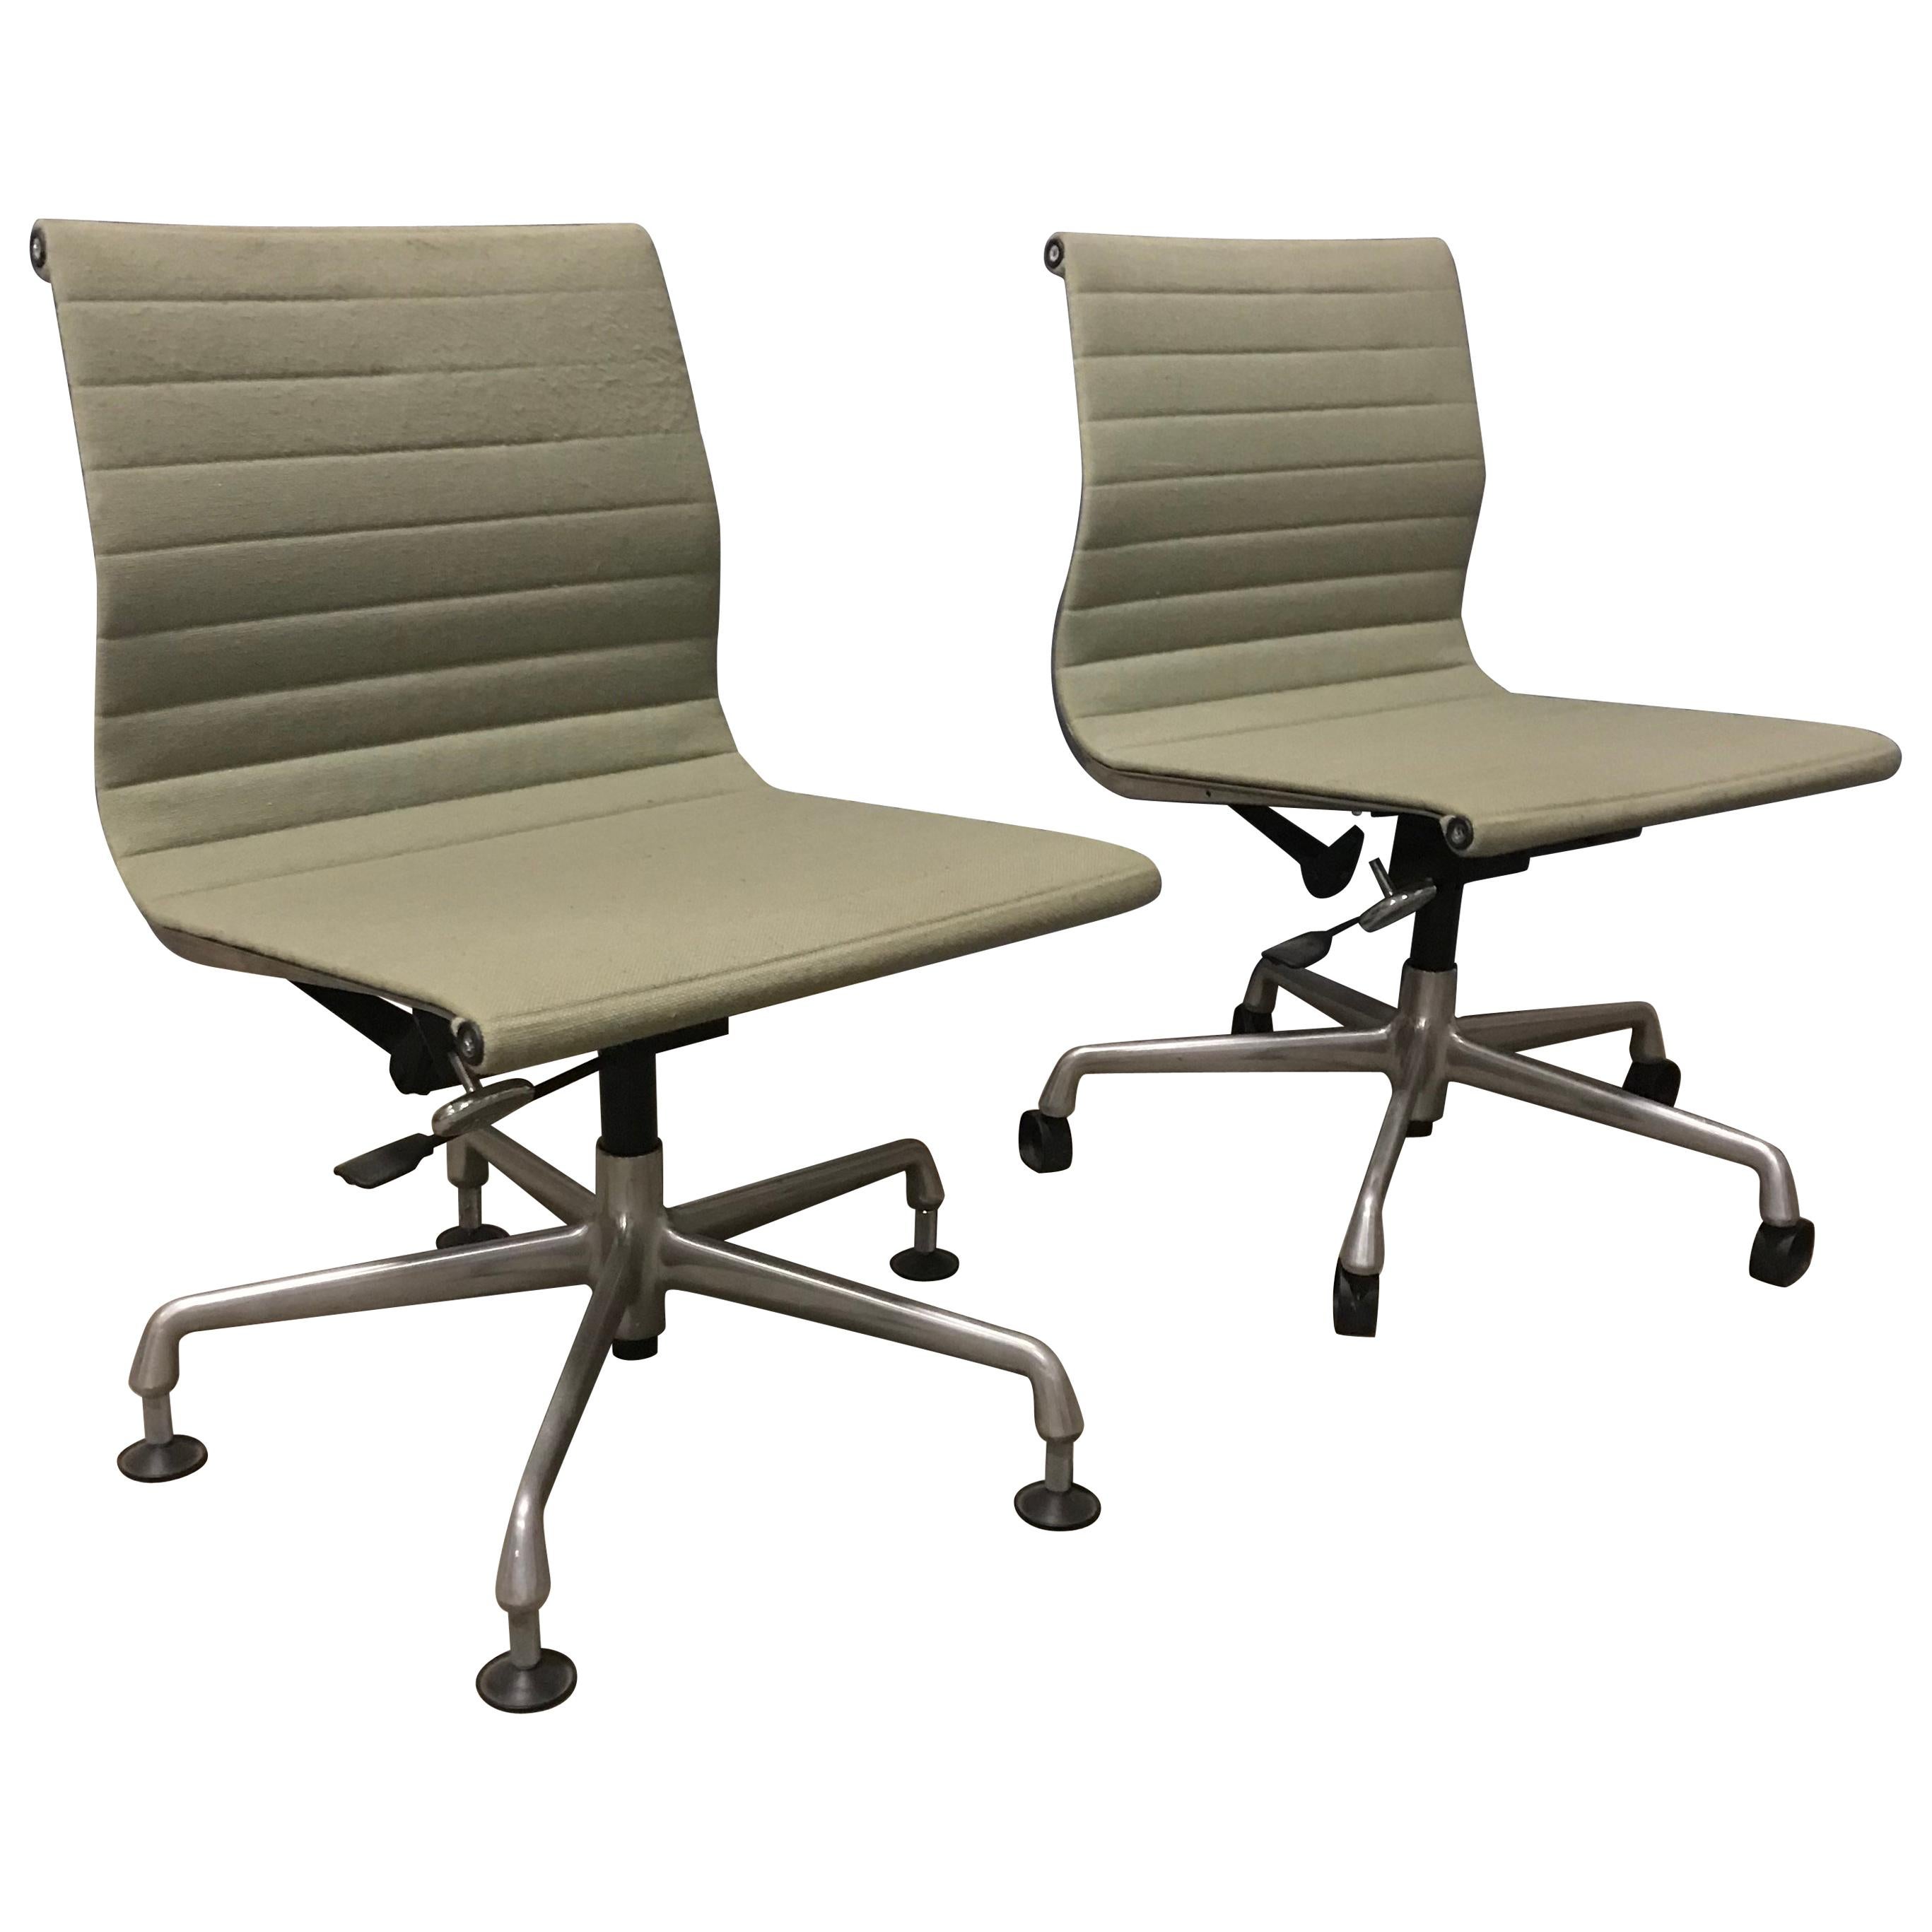 1958 Ray and Charles Eames, Fabric, Adjust, Tilt 2 Office Chair 4 Wheels No Arms For Sale